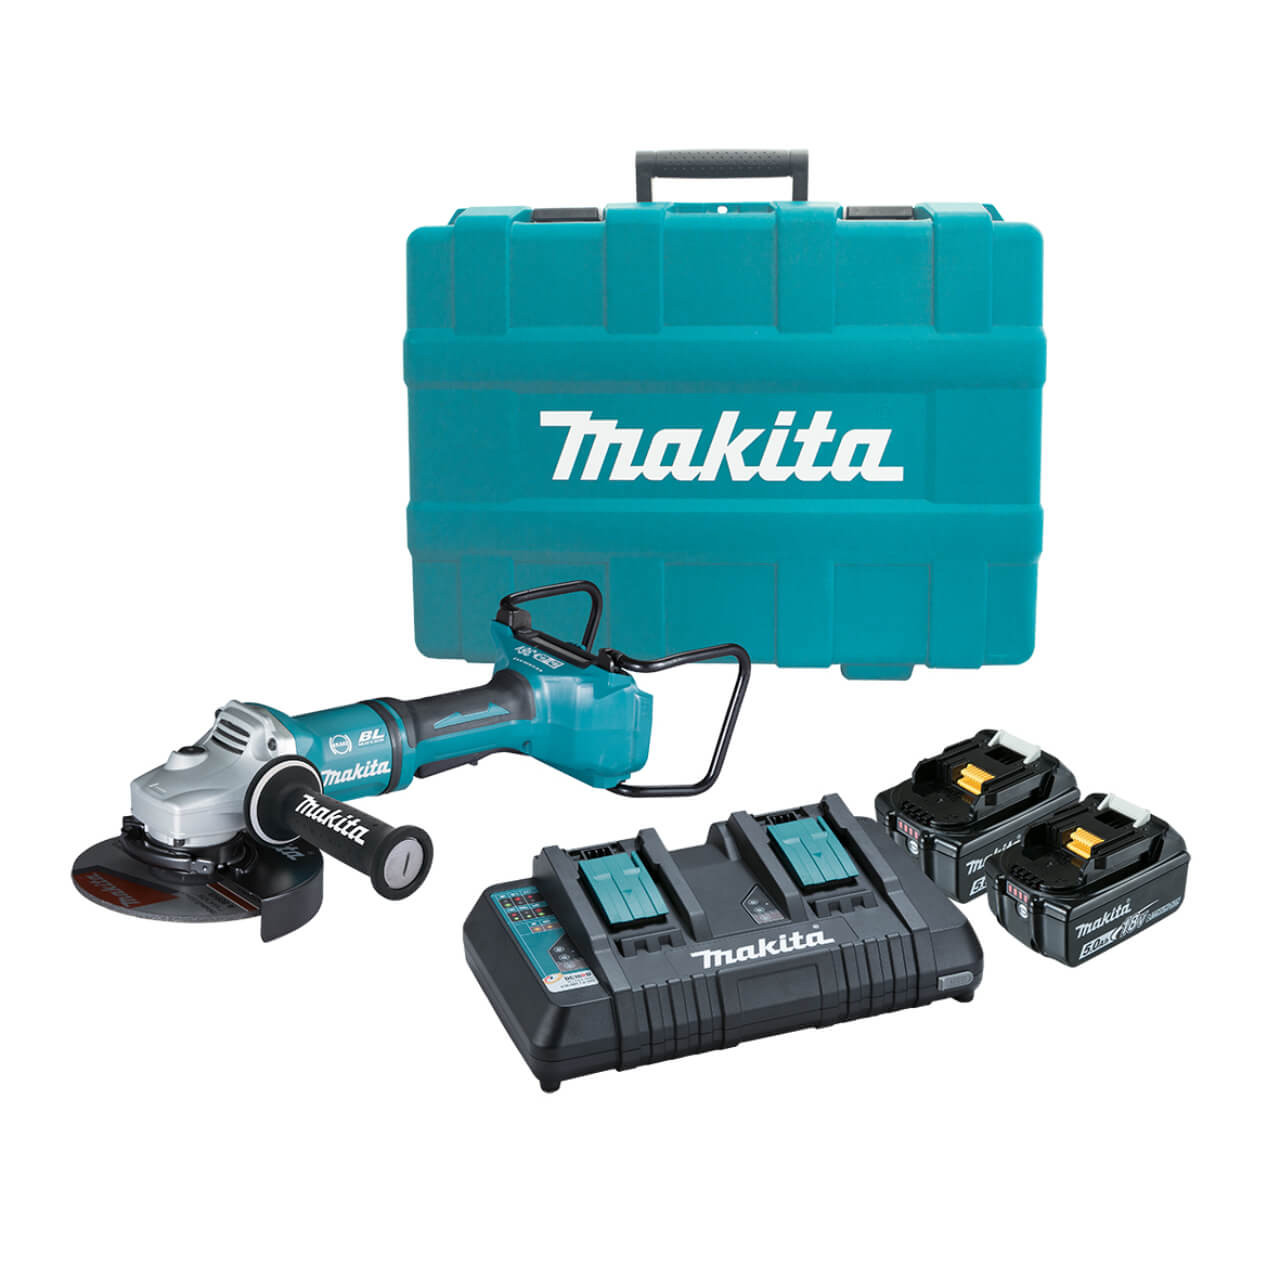 Makita 18Vx2 BRUSHLESS 180mm Paddle Switch Angle Grinder Kit - Includes 2 x 5.0Ah Batteries. Dual Port Rapid Charger & Carry Case